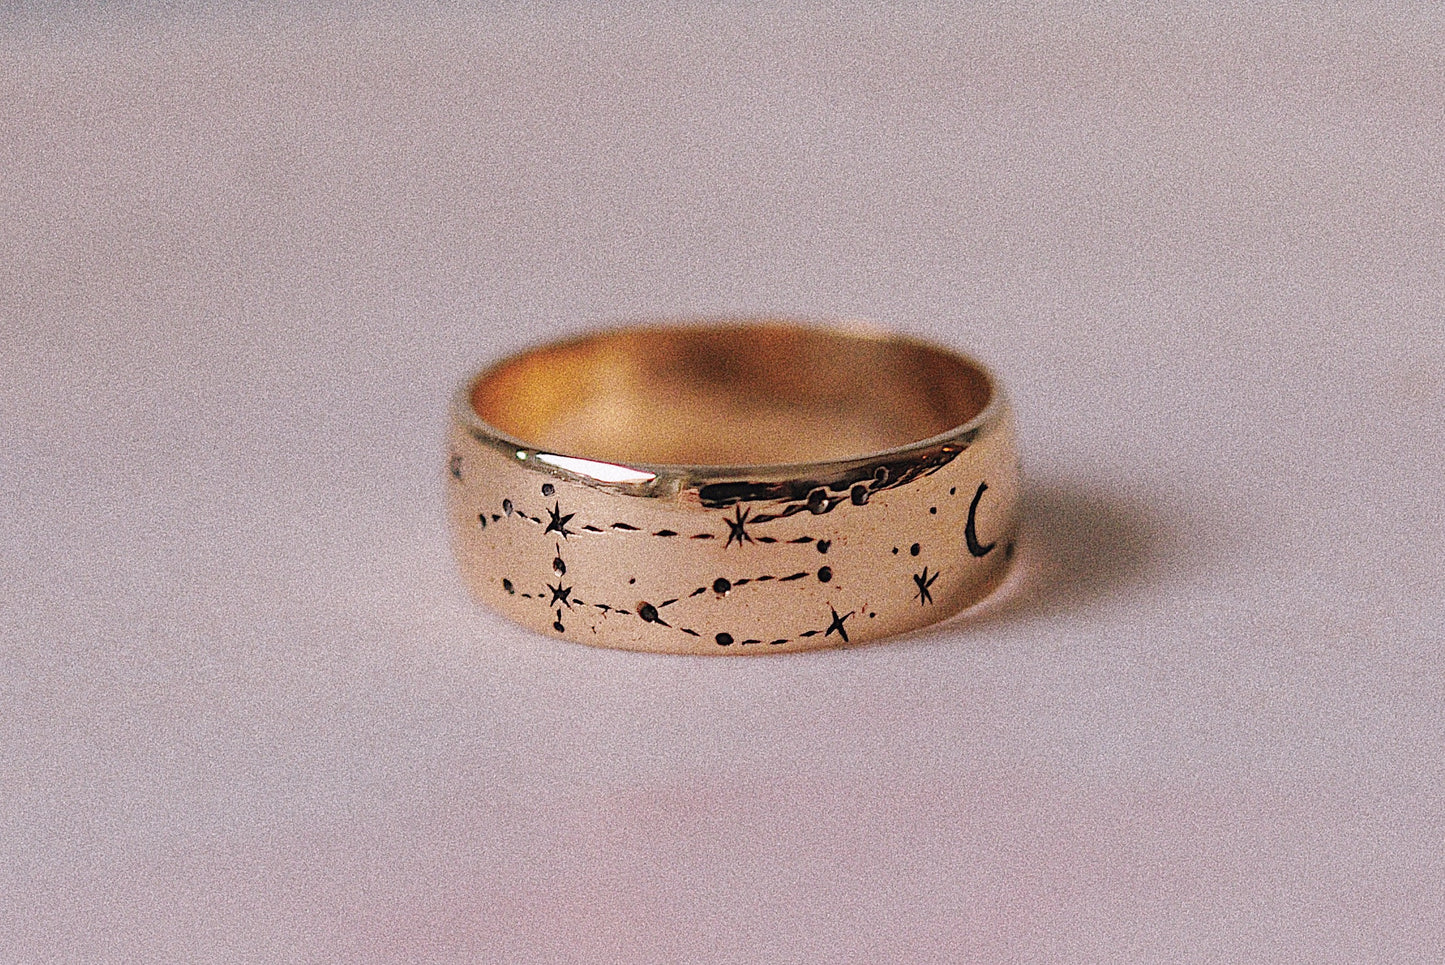 Wide Written in the Stars Ring